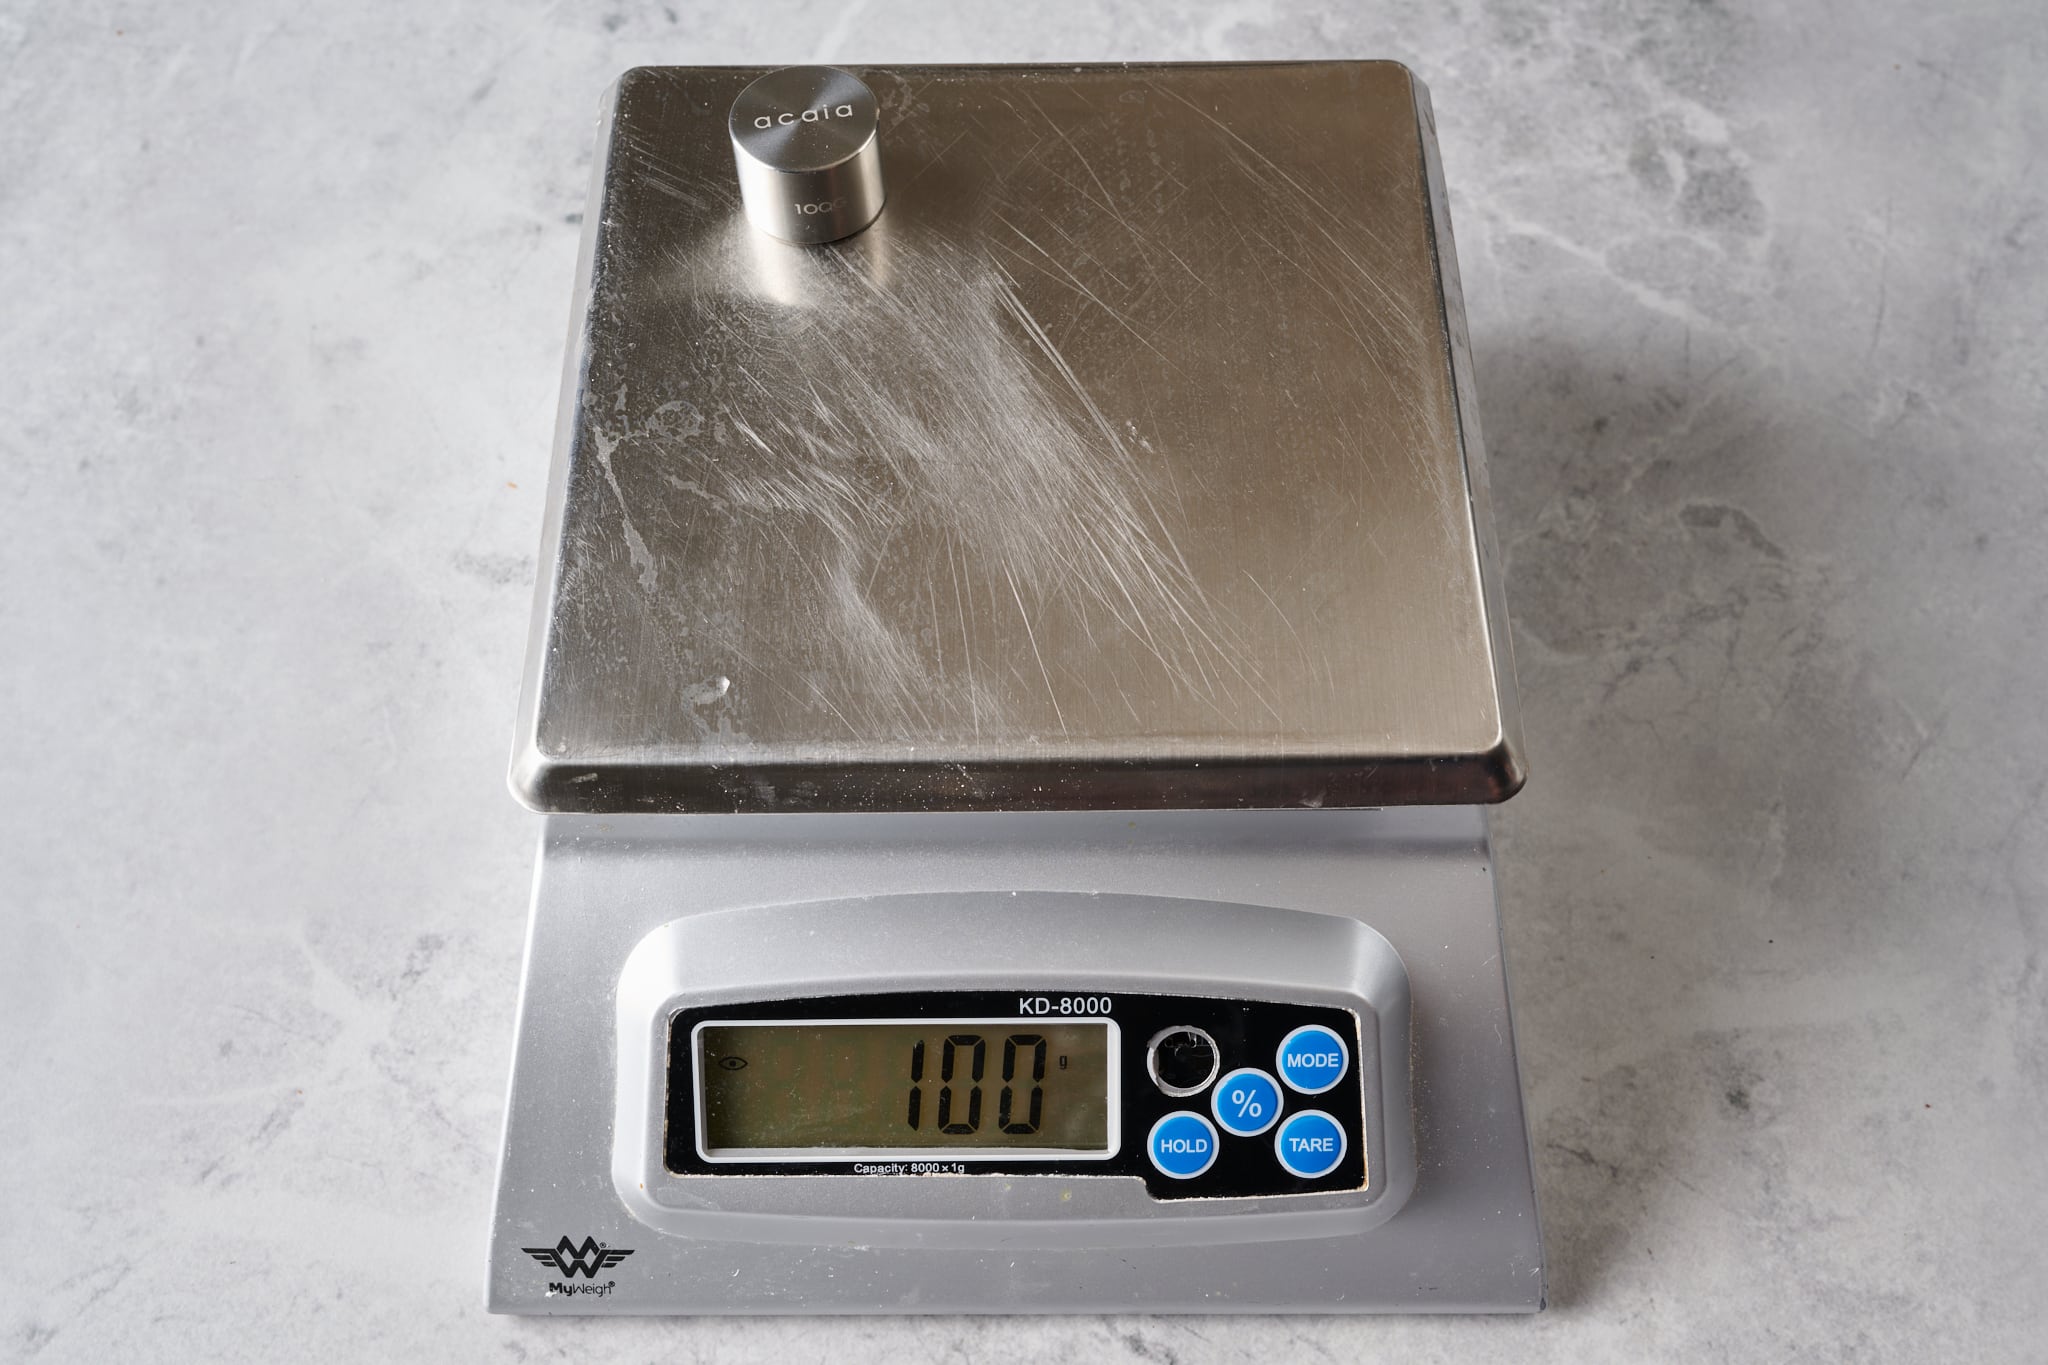 https://www.theperfectloaf.com/wp-content/uploads/2023/01/theperfectloaf_best_kitchen_scale_for_making_bread-3.jpg